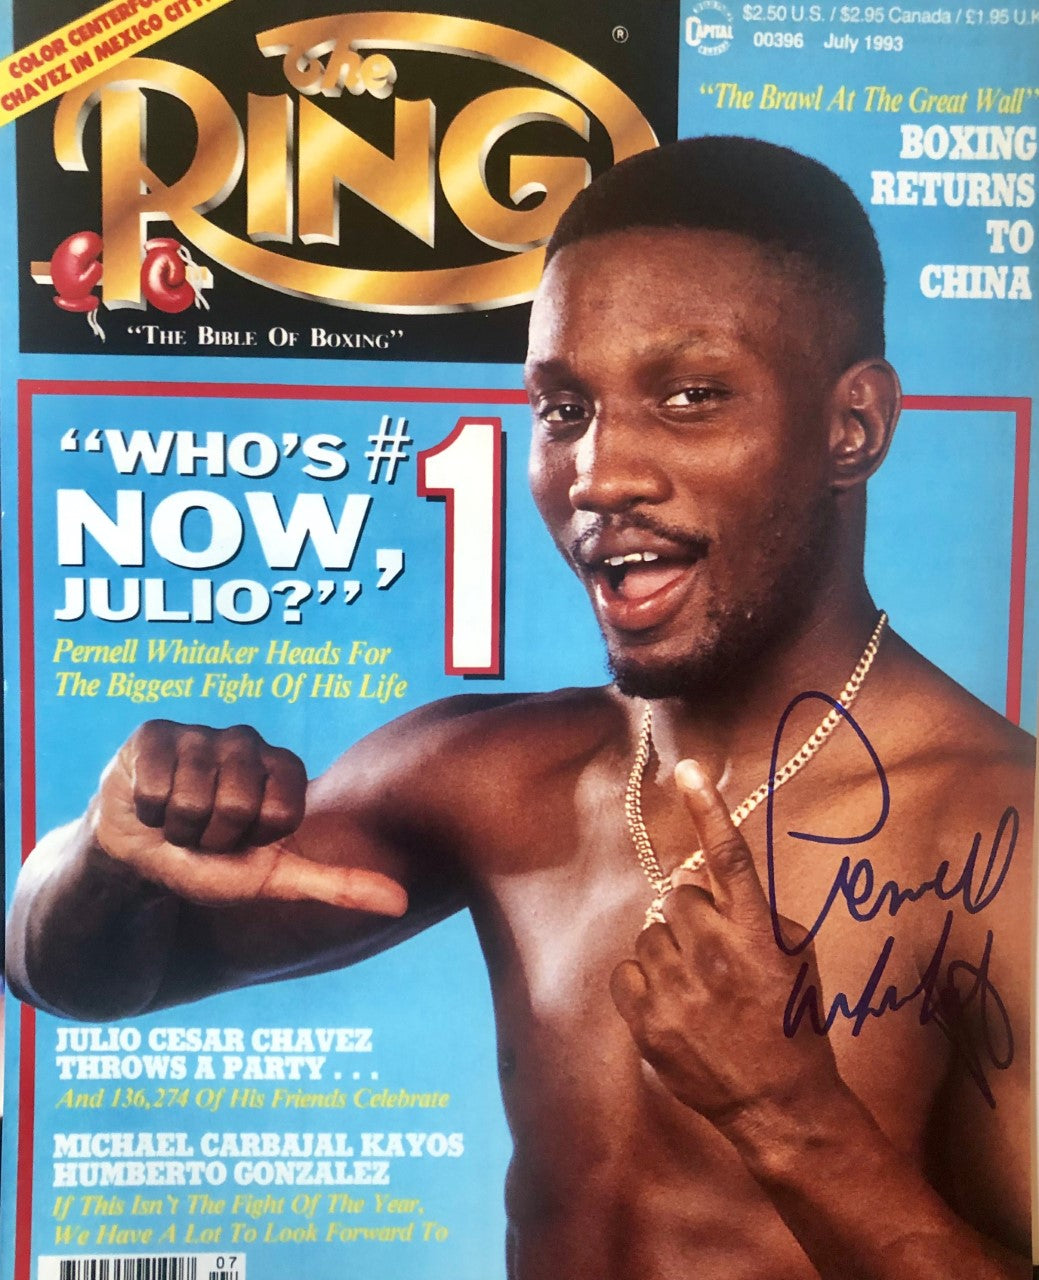 Pernell Whitaker Signed 8x10 Photo of the Champ on the Ring Magazine Cover